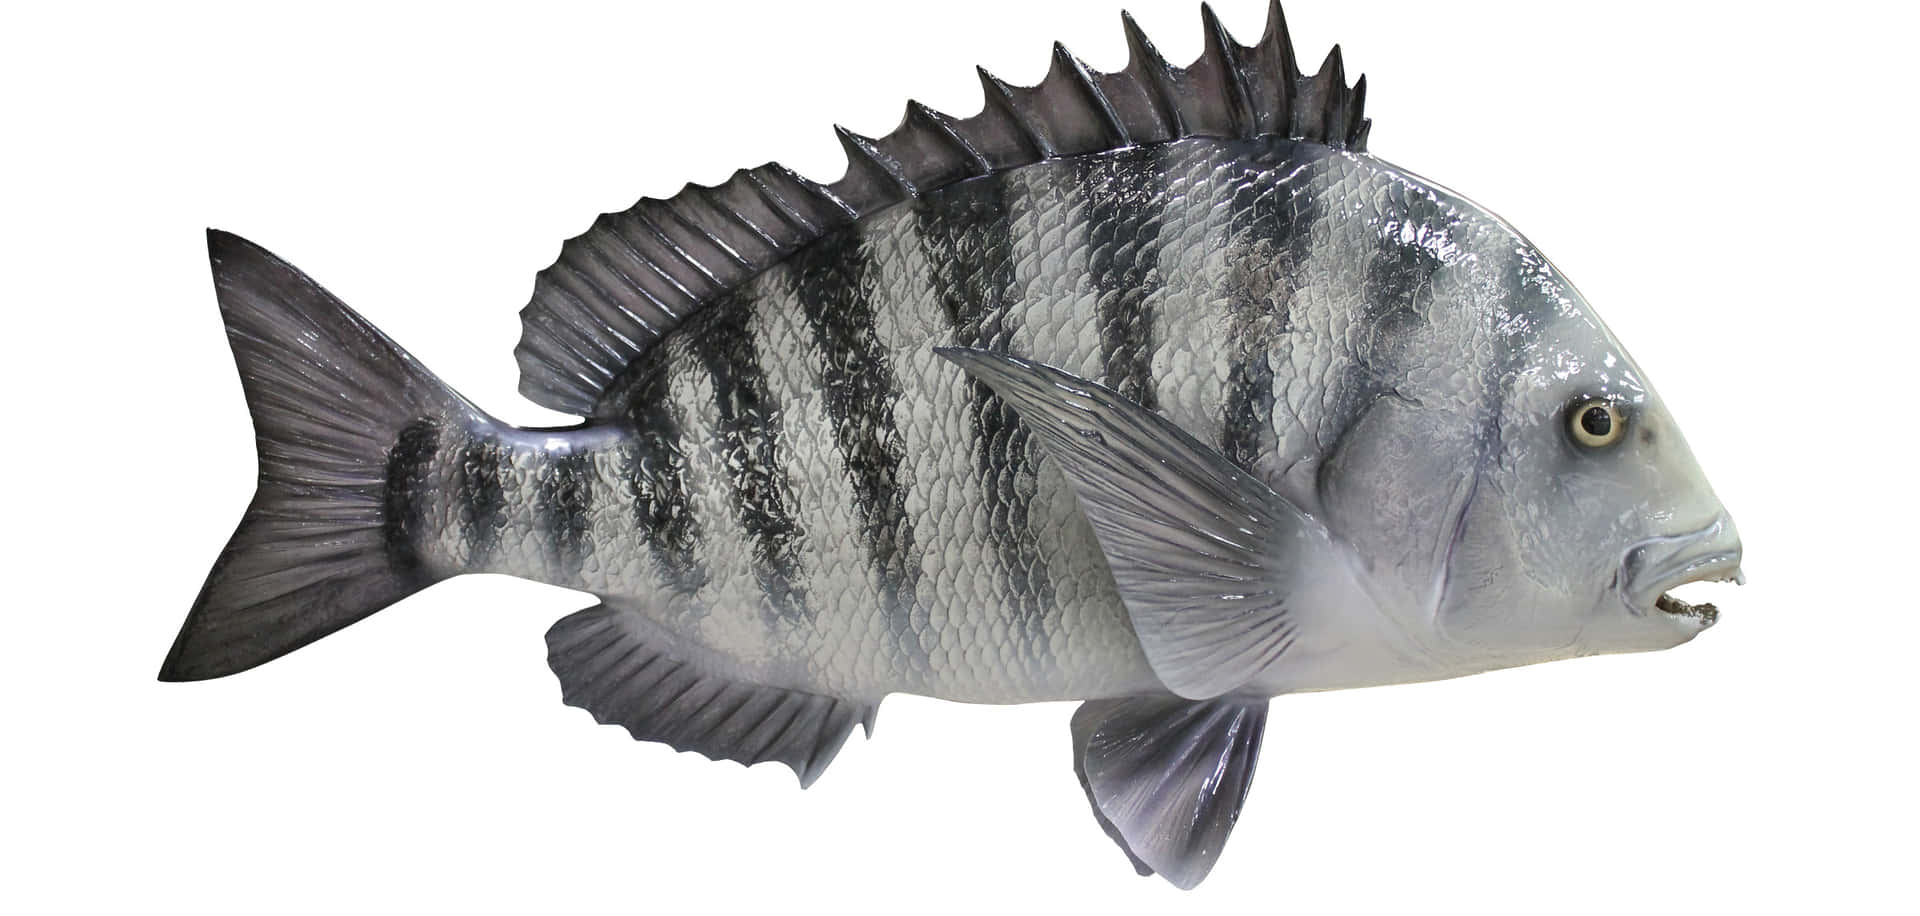 A Black And White Fish Is Shown On A White Background